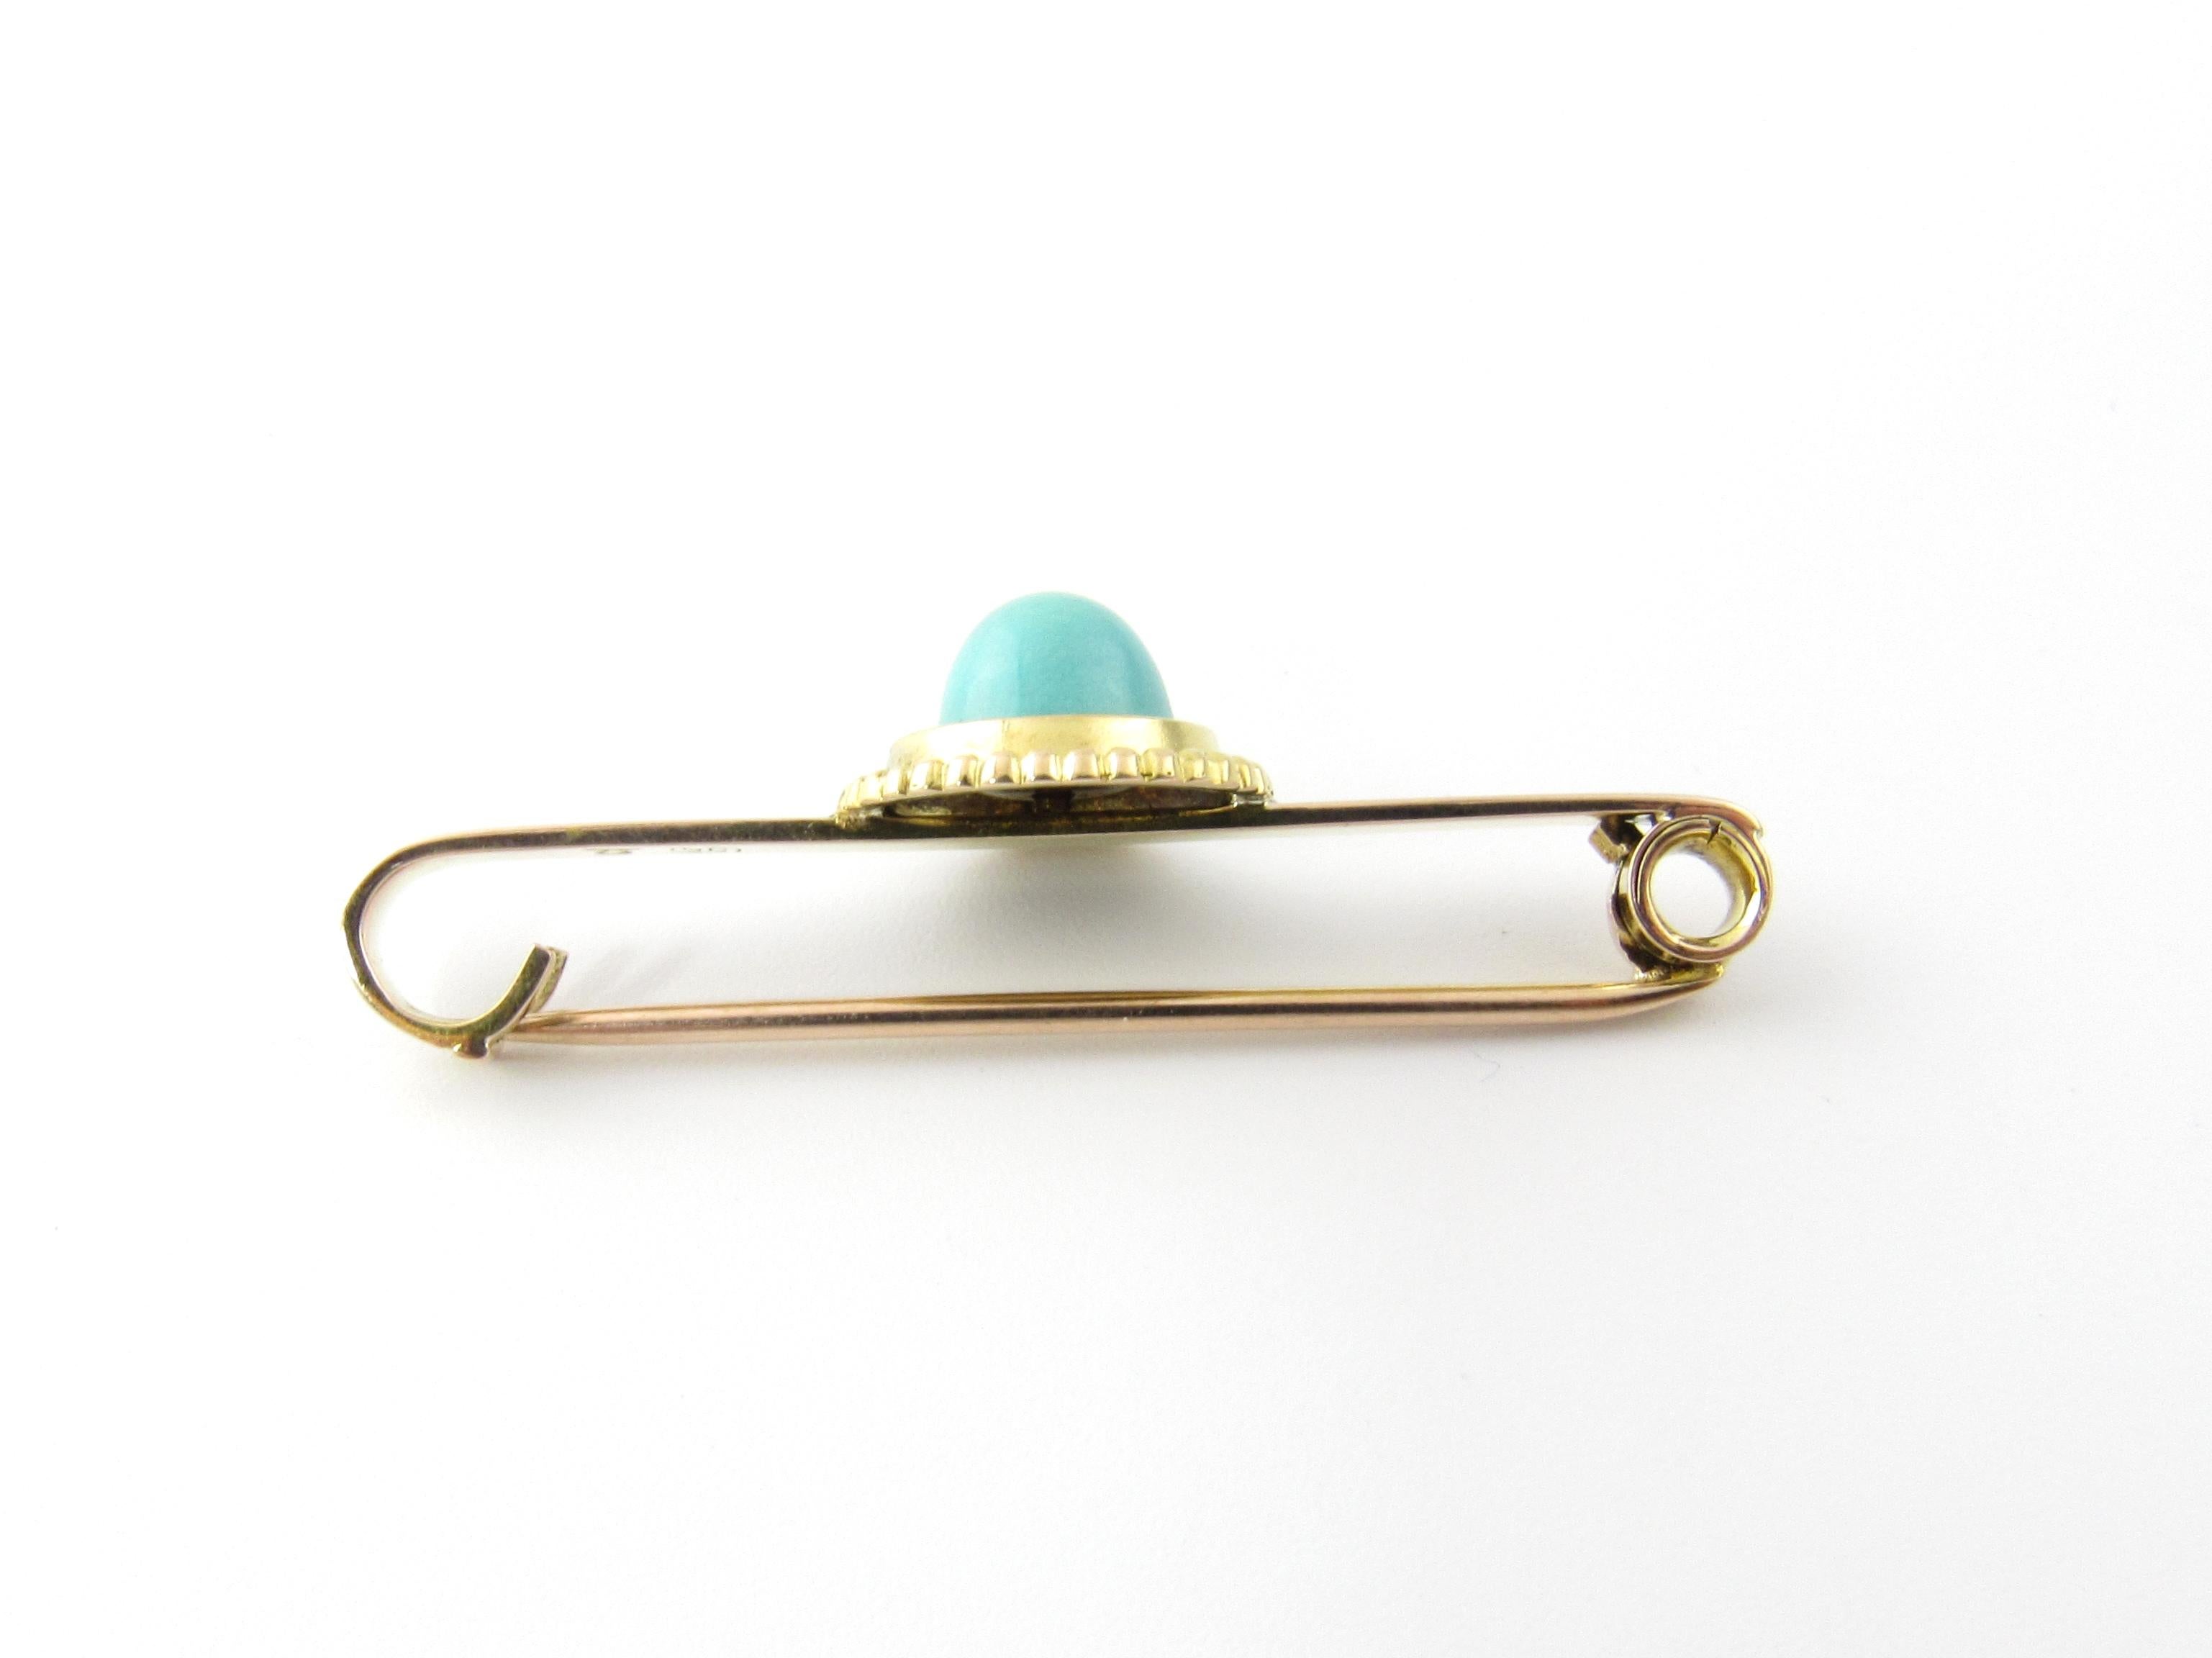 Vintage 9 Karat Yellow Gold and Turquoise Pin/Brooch

This lovely pin features one round turquoise stone (7 mm) set in beautifully detailed 9K yellow gold.

Size: 40 mm x 12.5 mm

Weight: 1.8 dwt. / 2.8 gr.

Stamped: 9c

Very good condition,